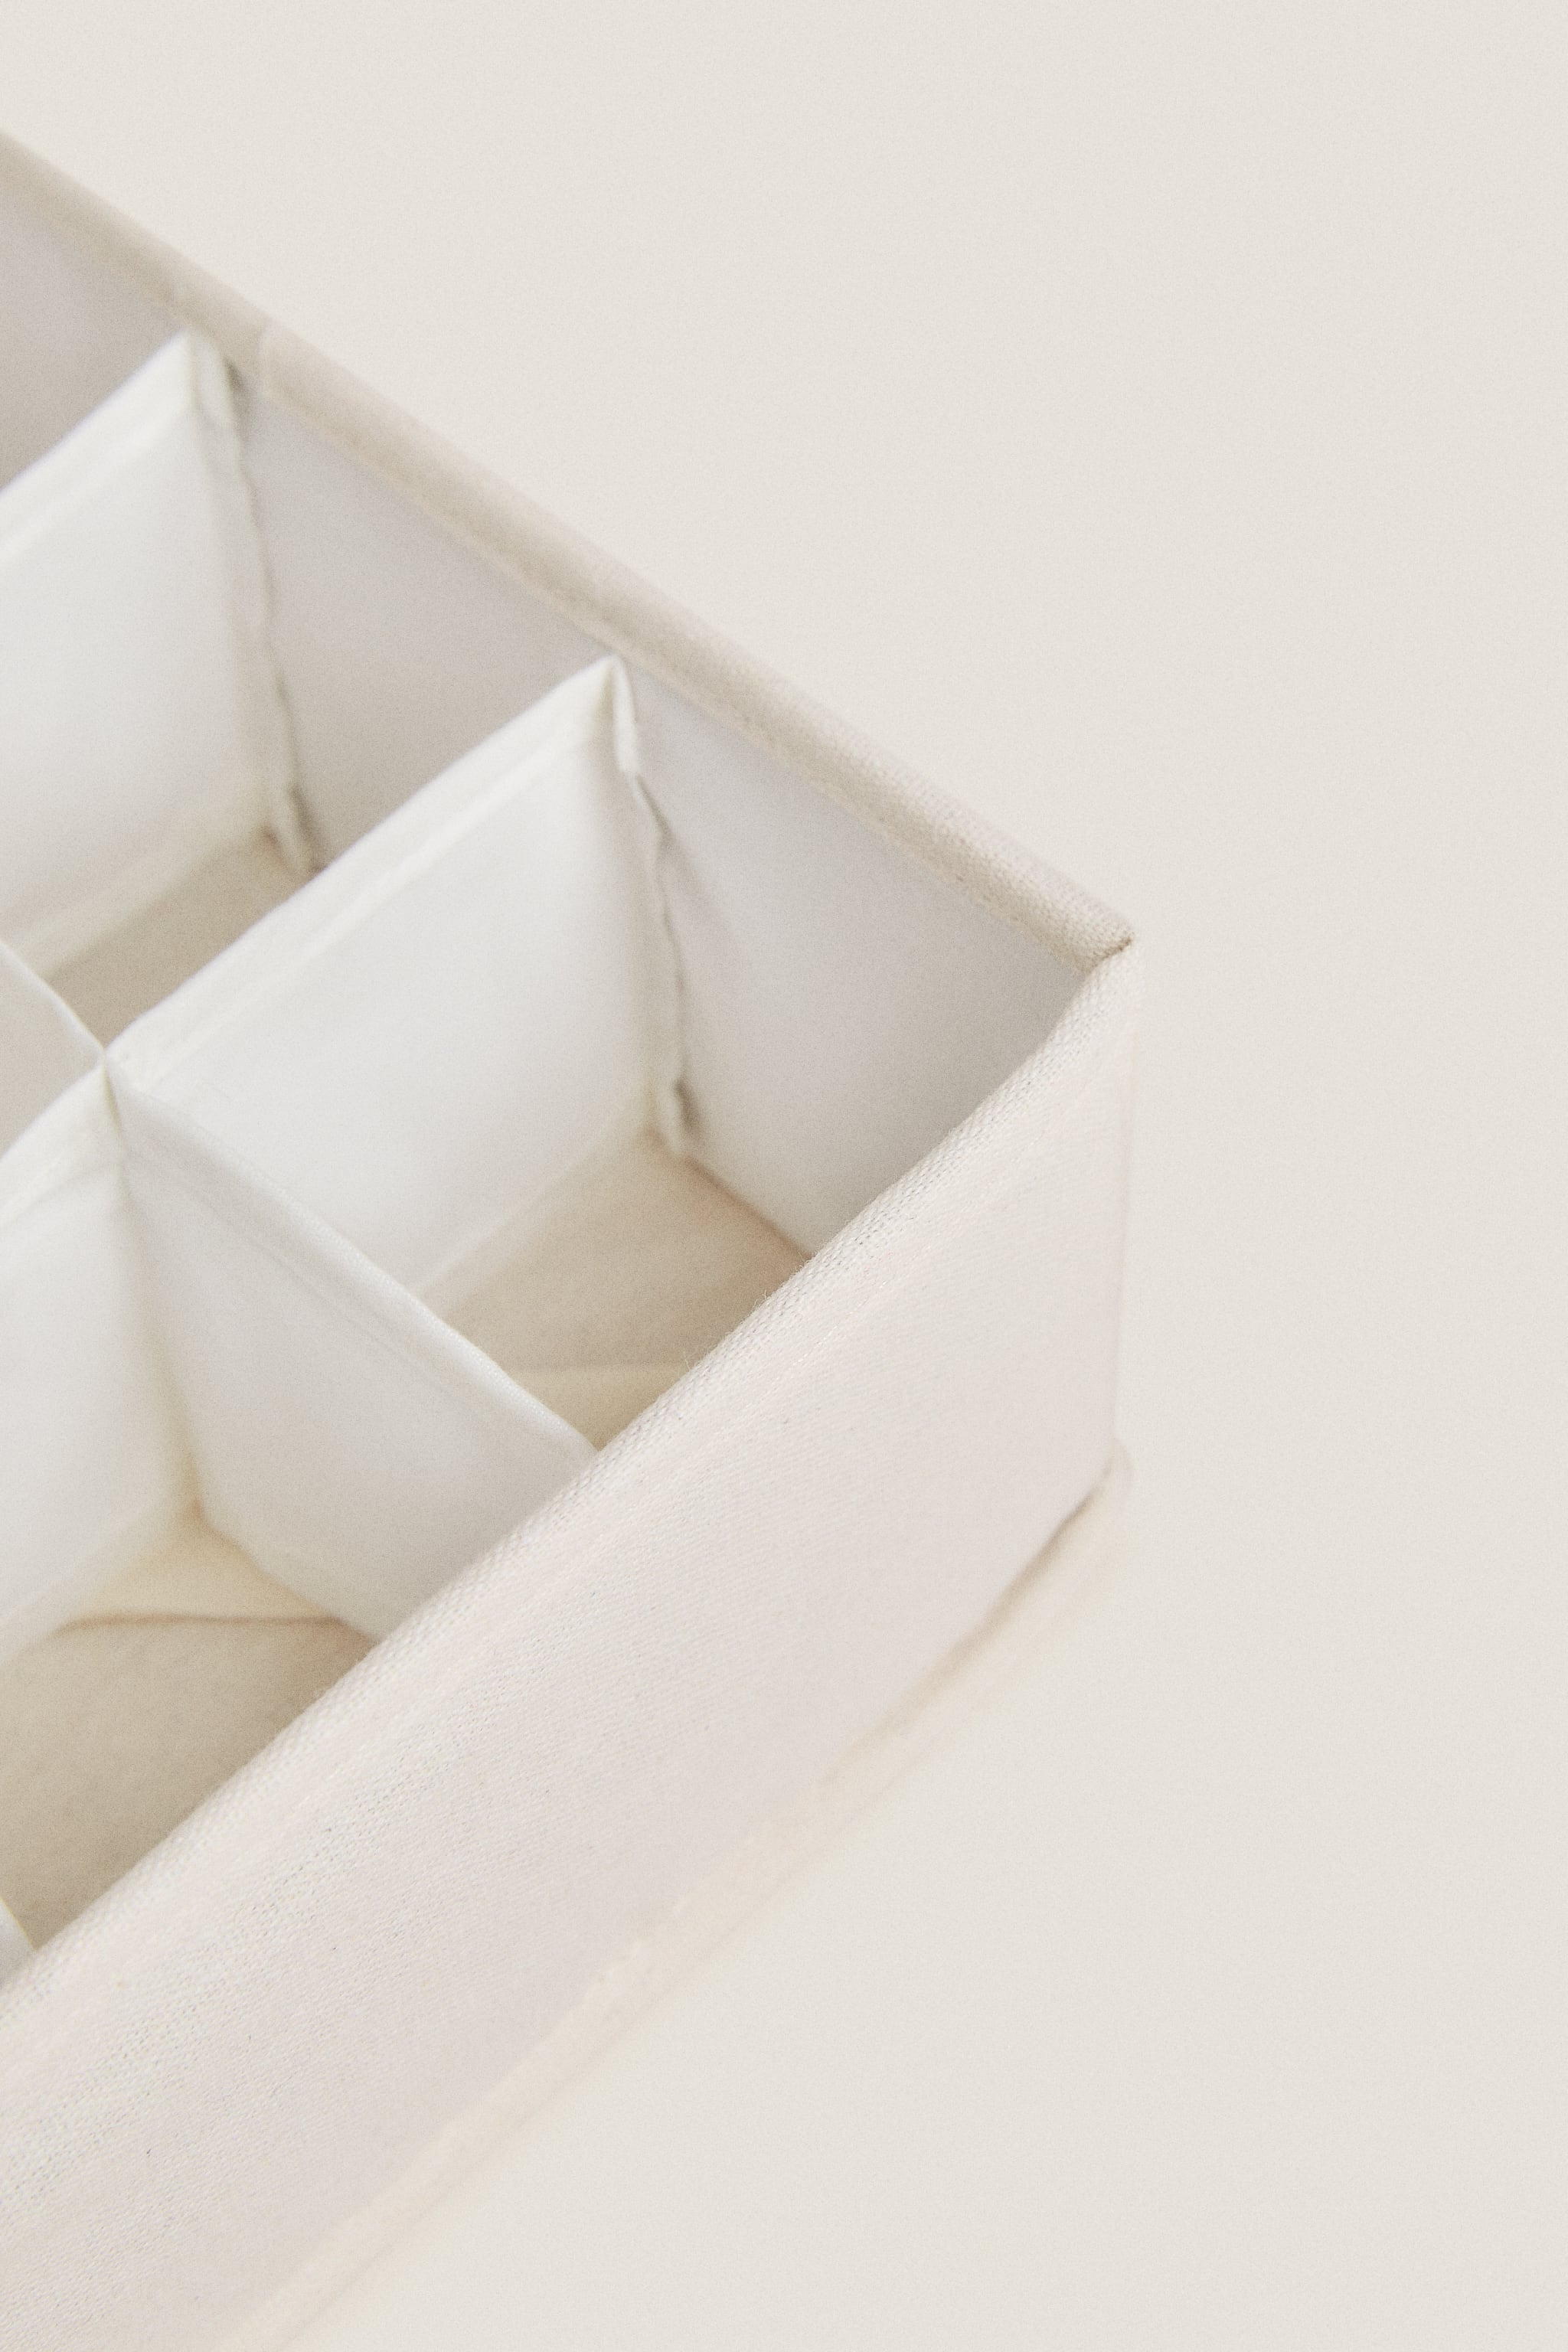 ORGANIZER BASKET WITH COMPARTMENTS